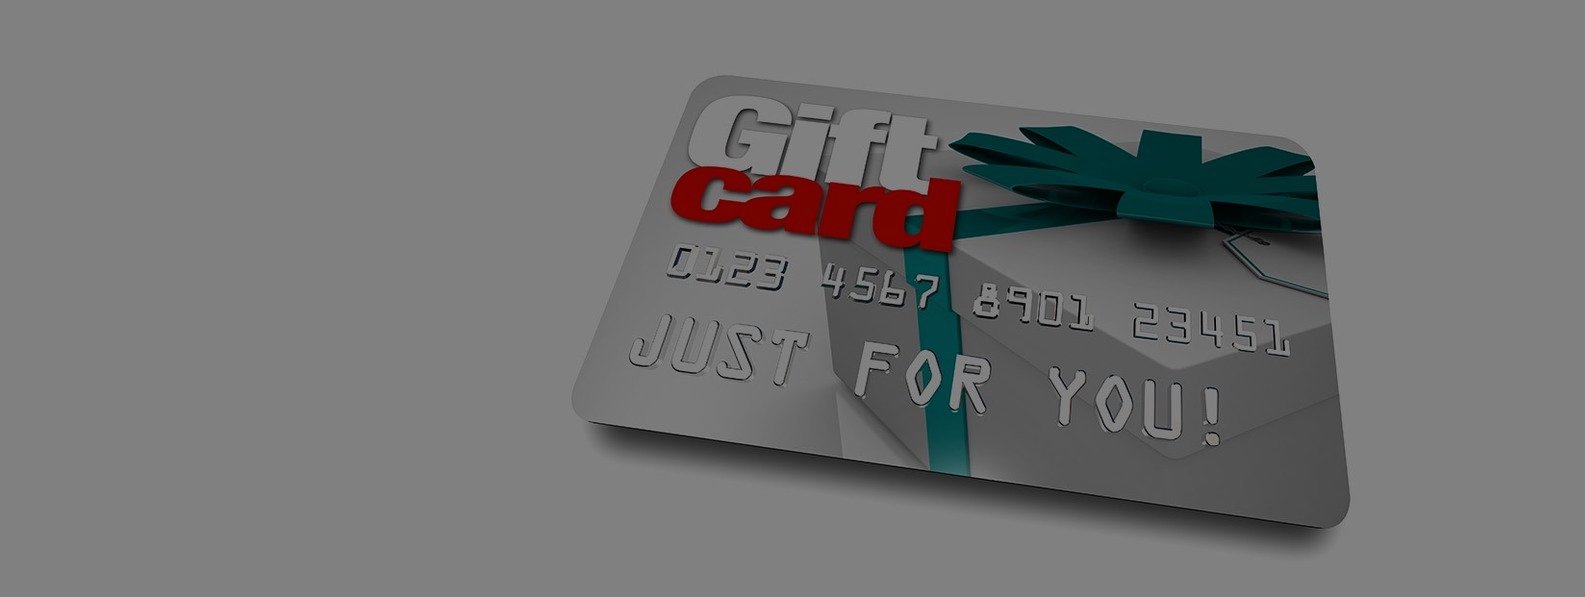 We Buy Your<br> <span class="thin">Gift Cards</span>